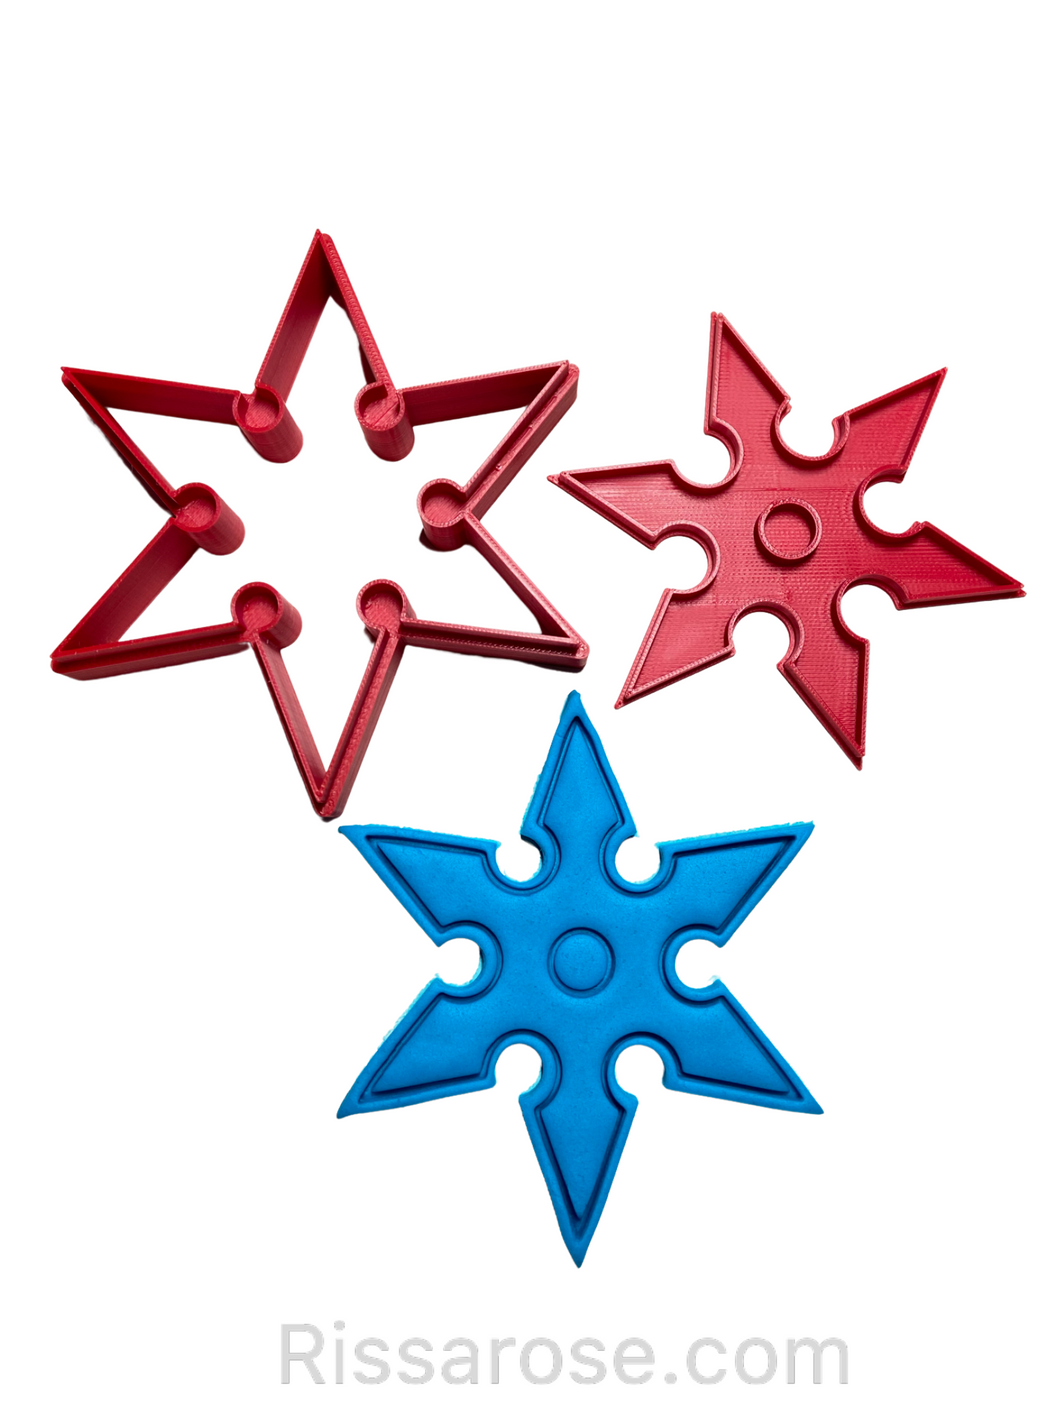 ninja star cookie cutter and stamp